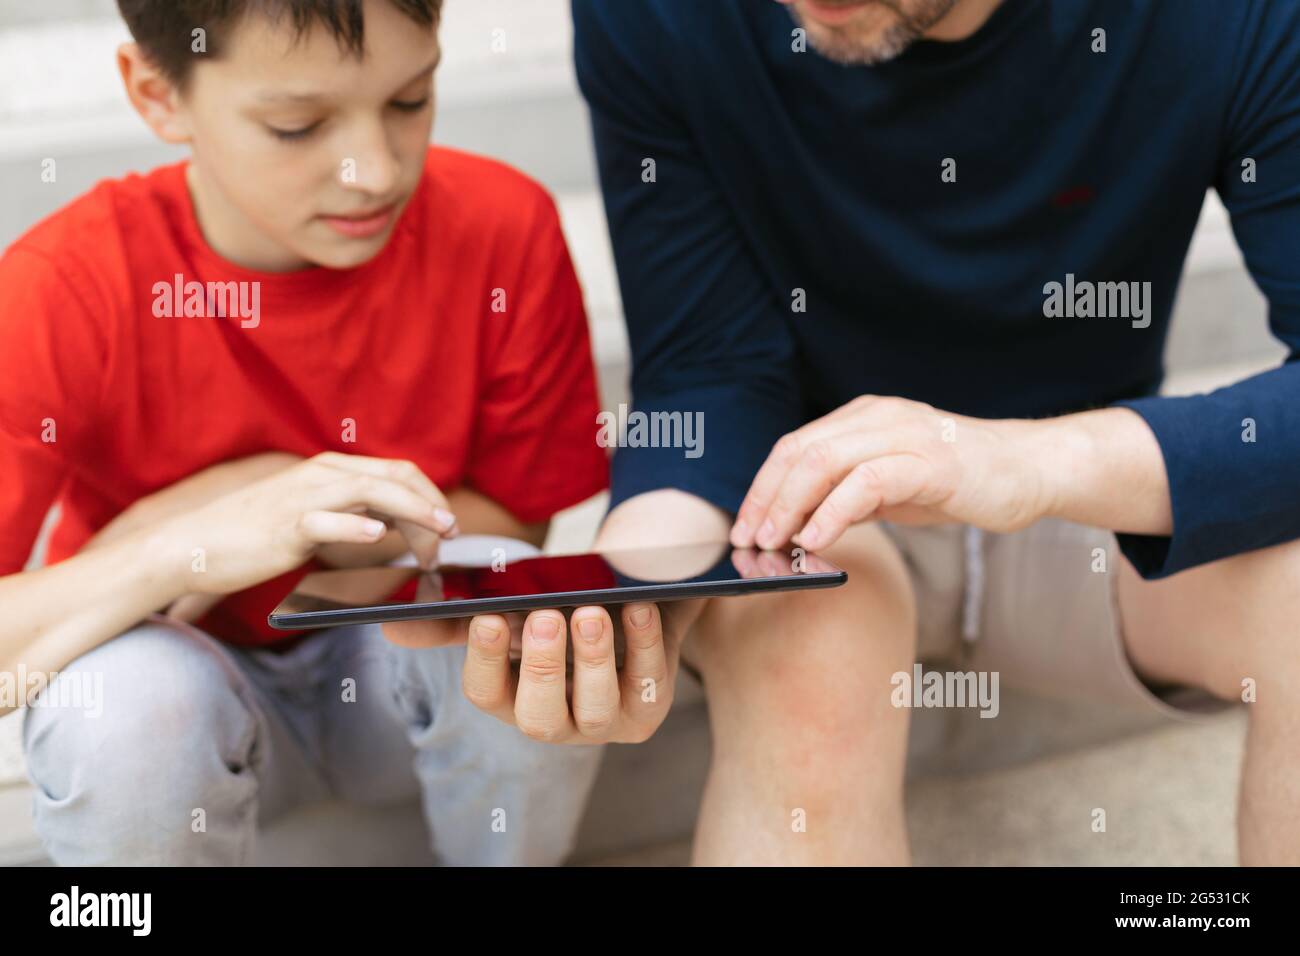 The concept of using gadgets for education or spending time with children. Young dad and son on steps of concrete staircase Stock Photo